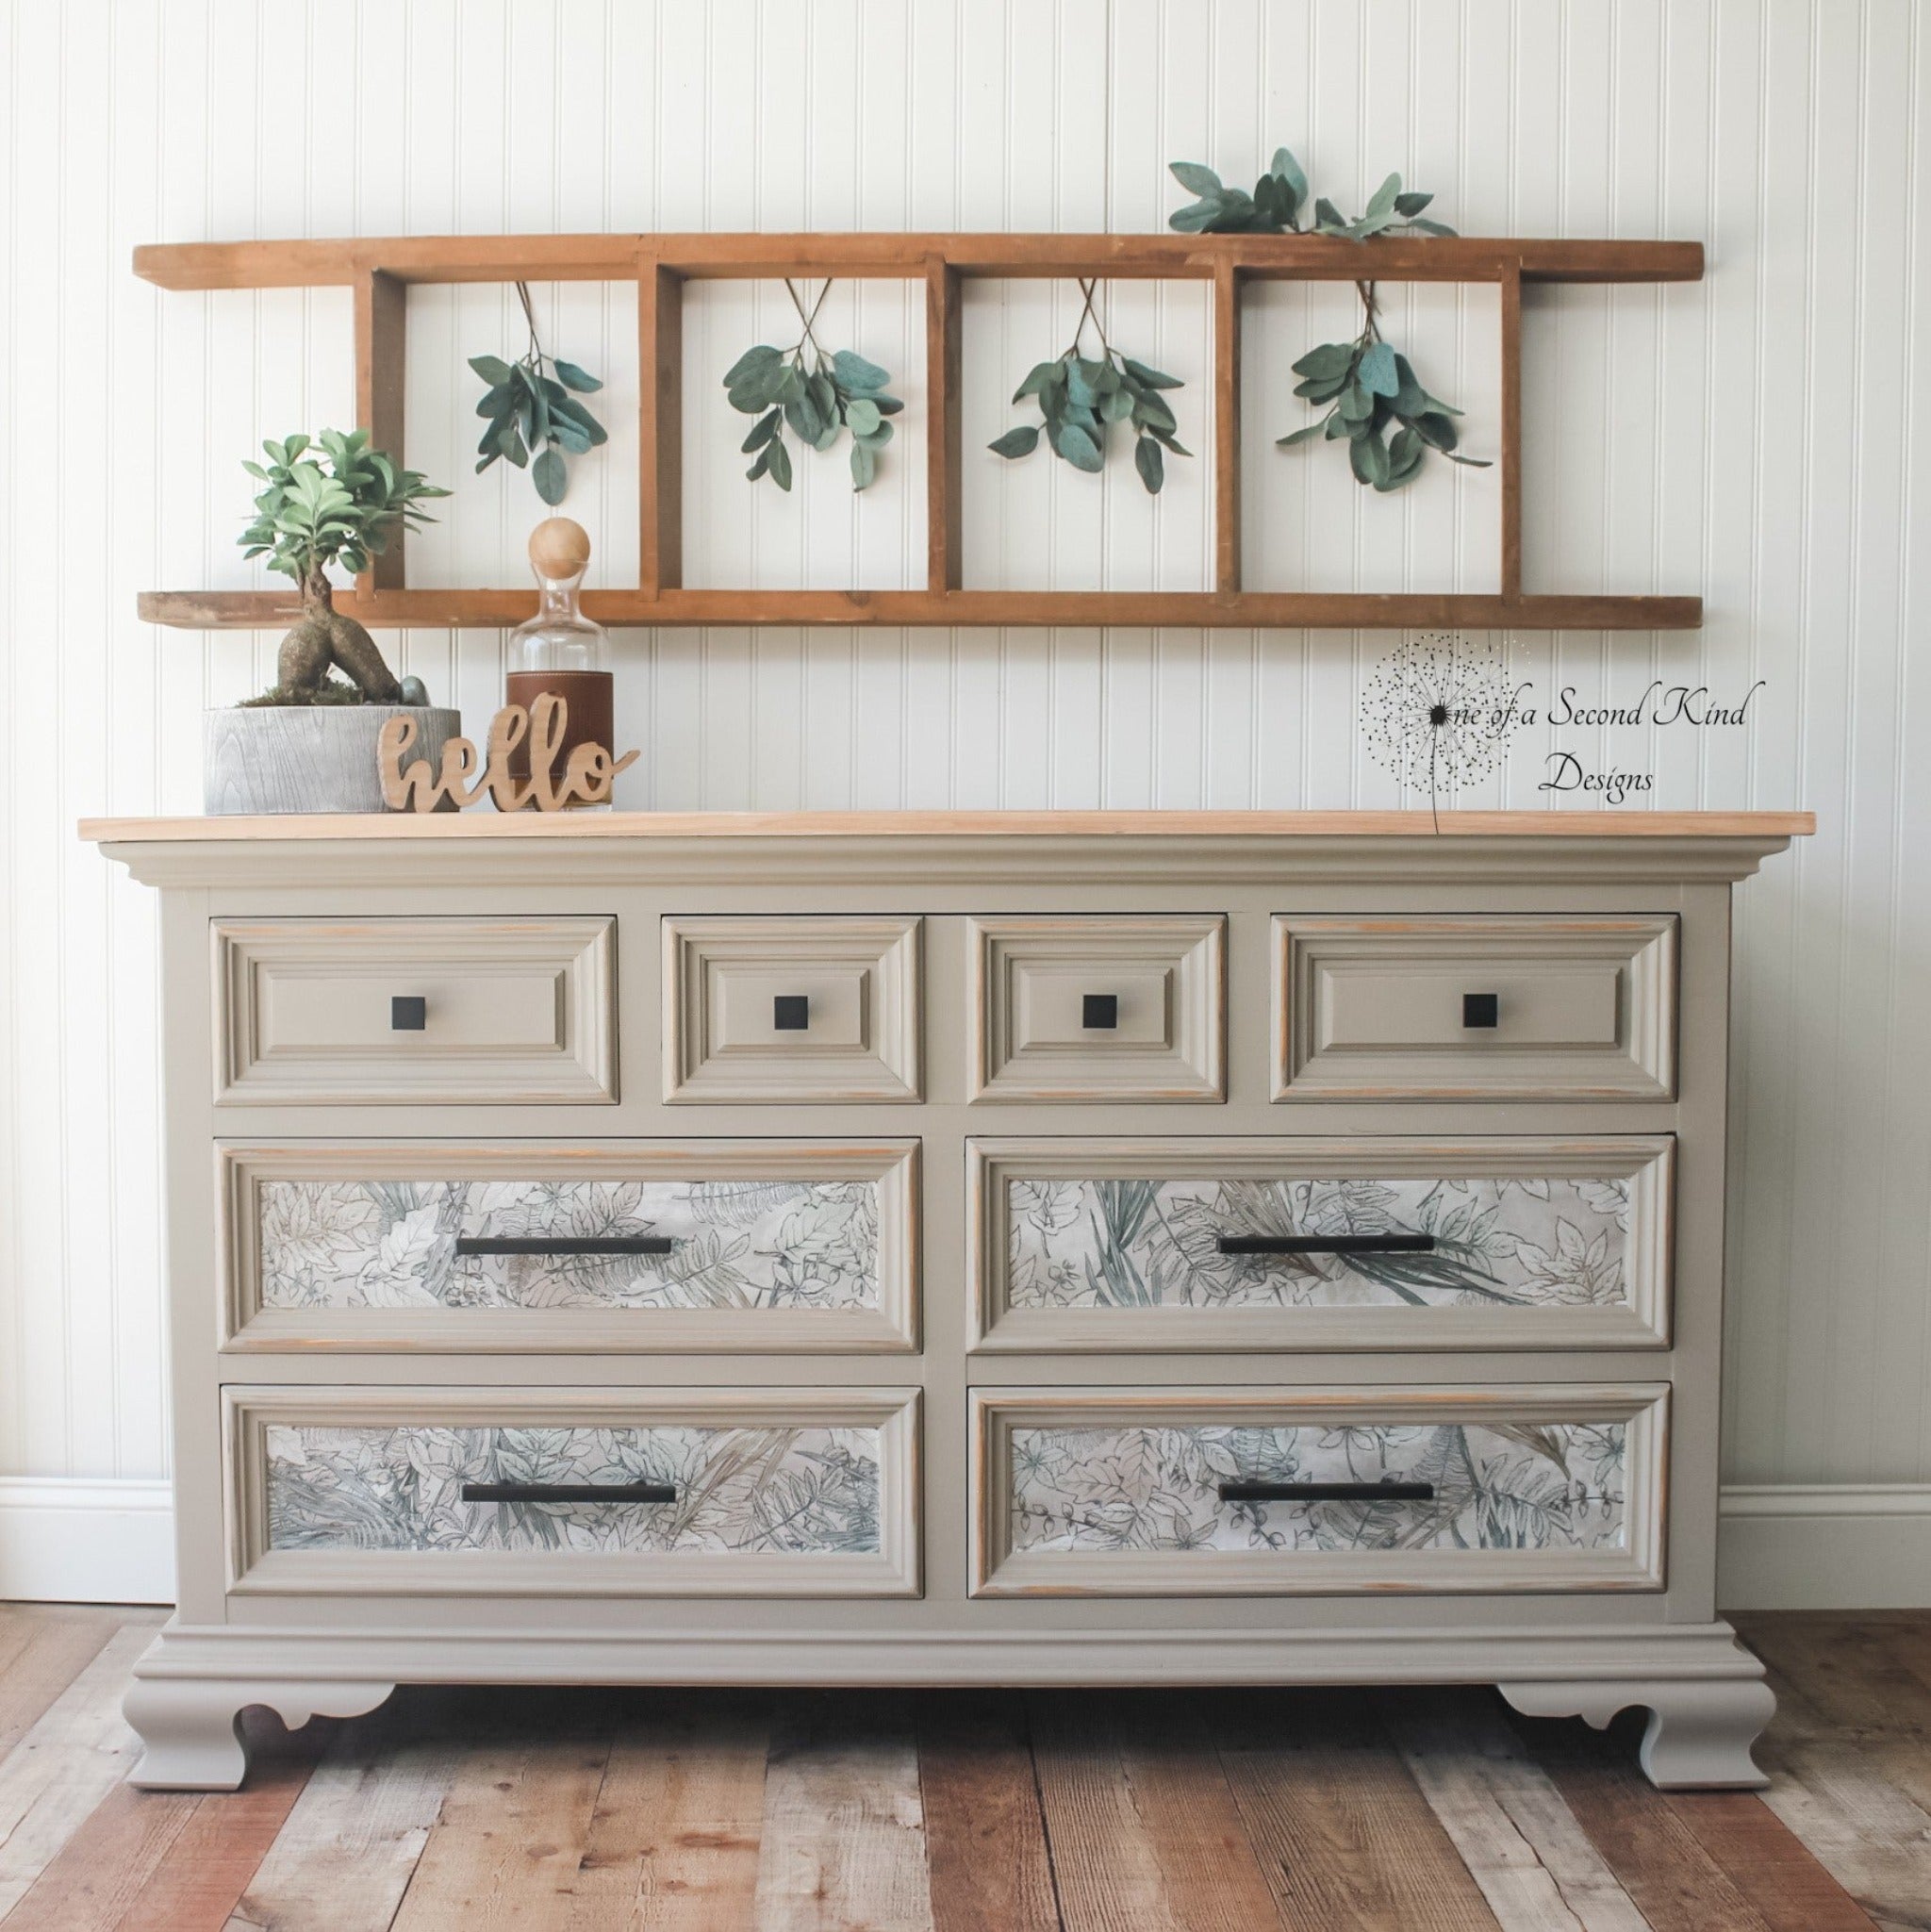 A vintage dresser refurbished by One of a Kind Designs is painted beige and features ReDesign with Prima's Tranquil Autumn tissue paper on its 4 bottom drawers.